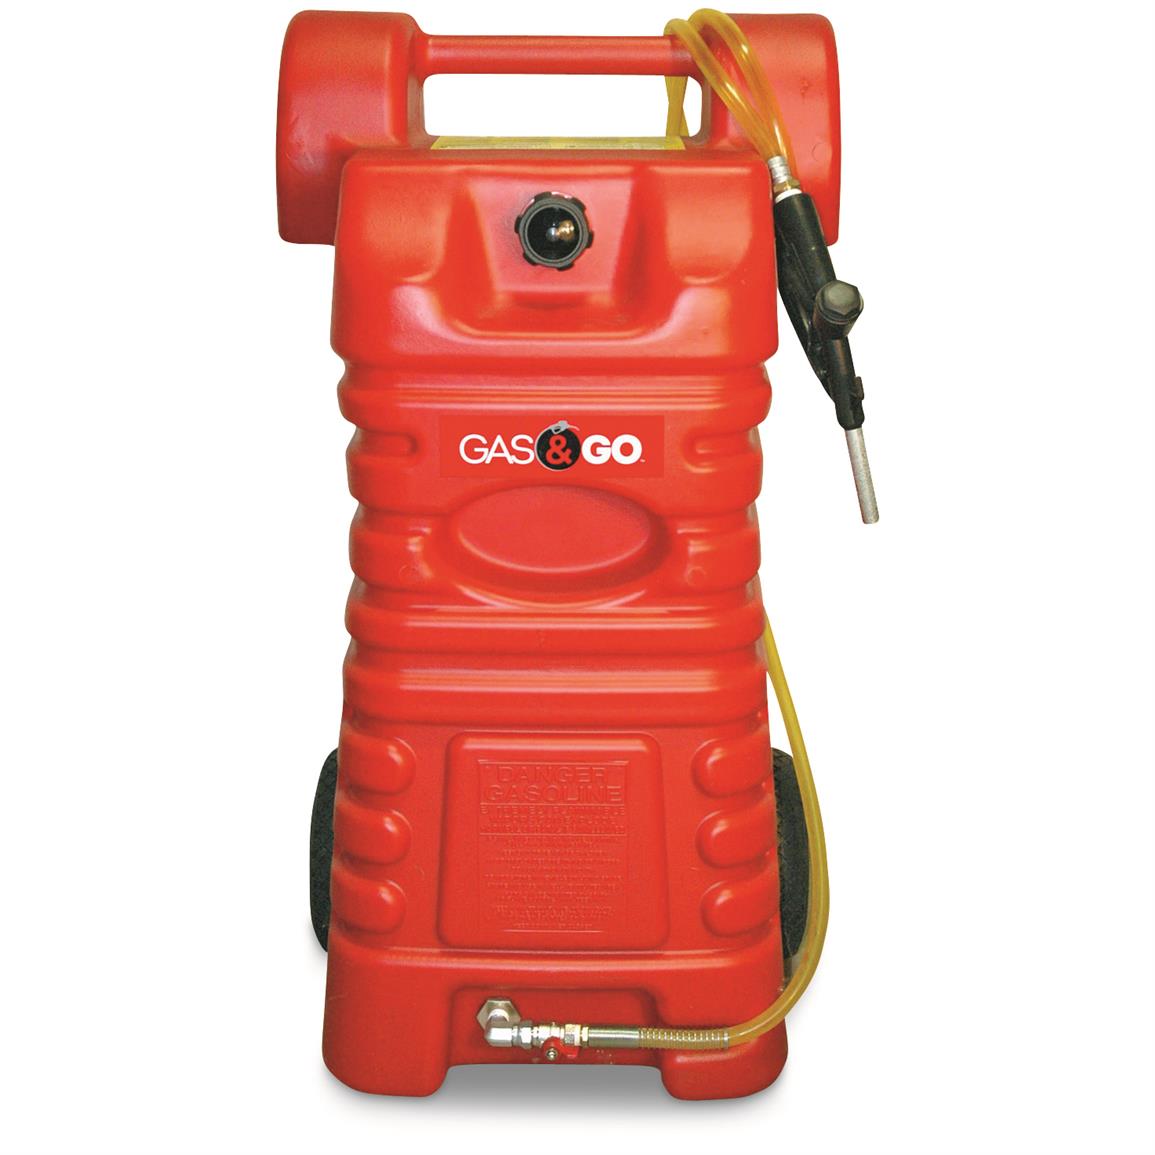 Portable 25 Gallon Gas Caddy With Two Way Rotary Pump 680877 Fuel